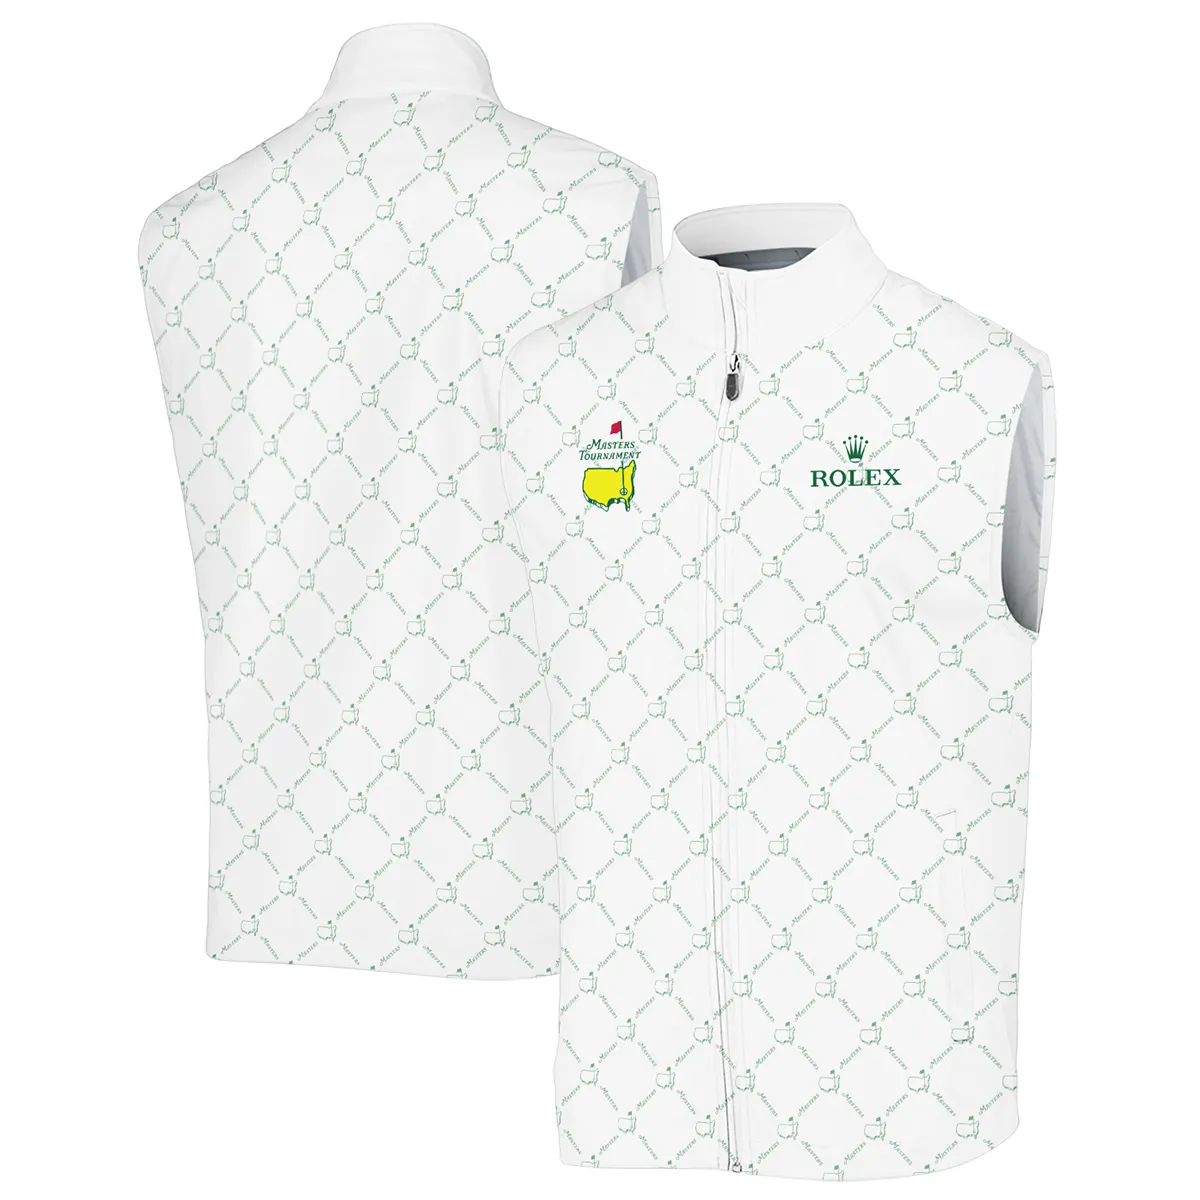 Golf Sport Pattern Color White Mix Masters Tournament Rolex Polo Shirt Style Classic